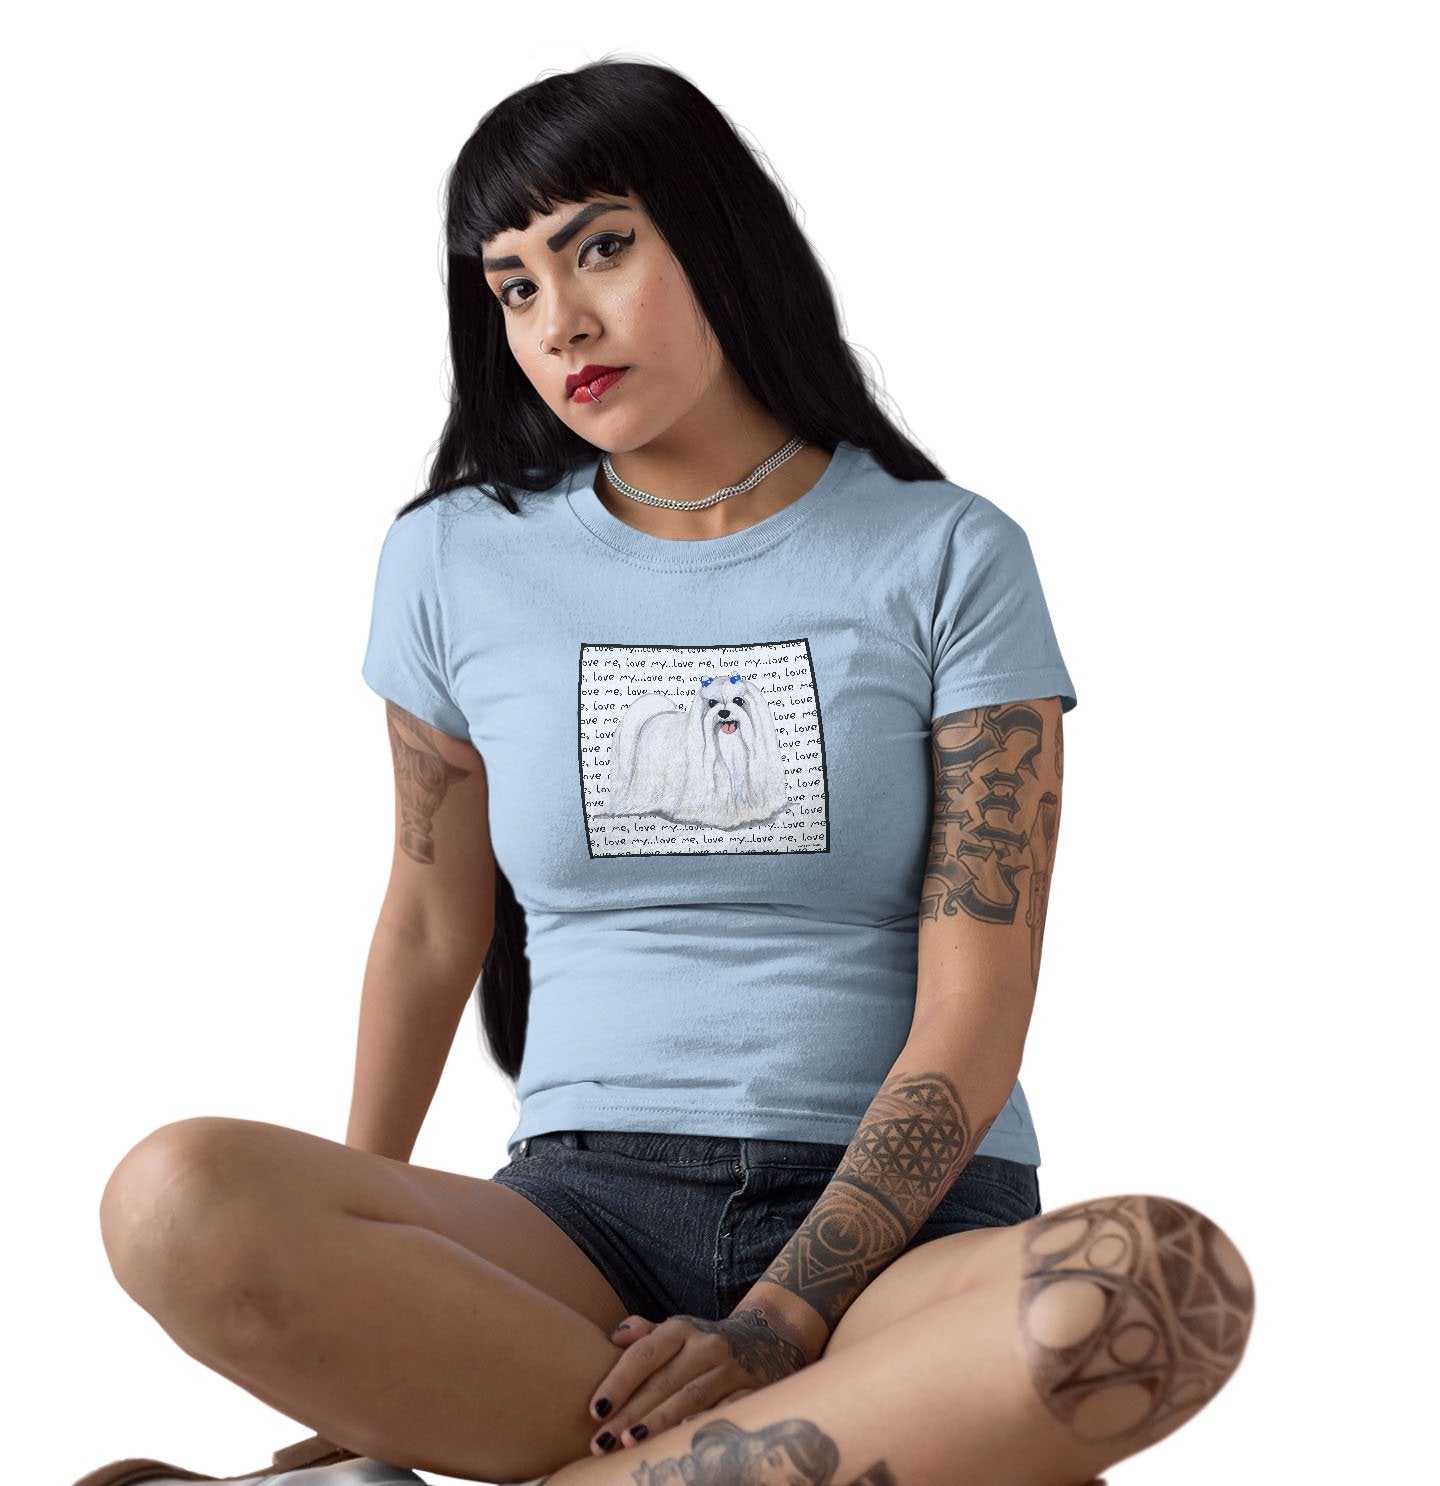 Animal Pride - Maltese Love Text - Women's Fitted T-Shirt